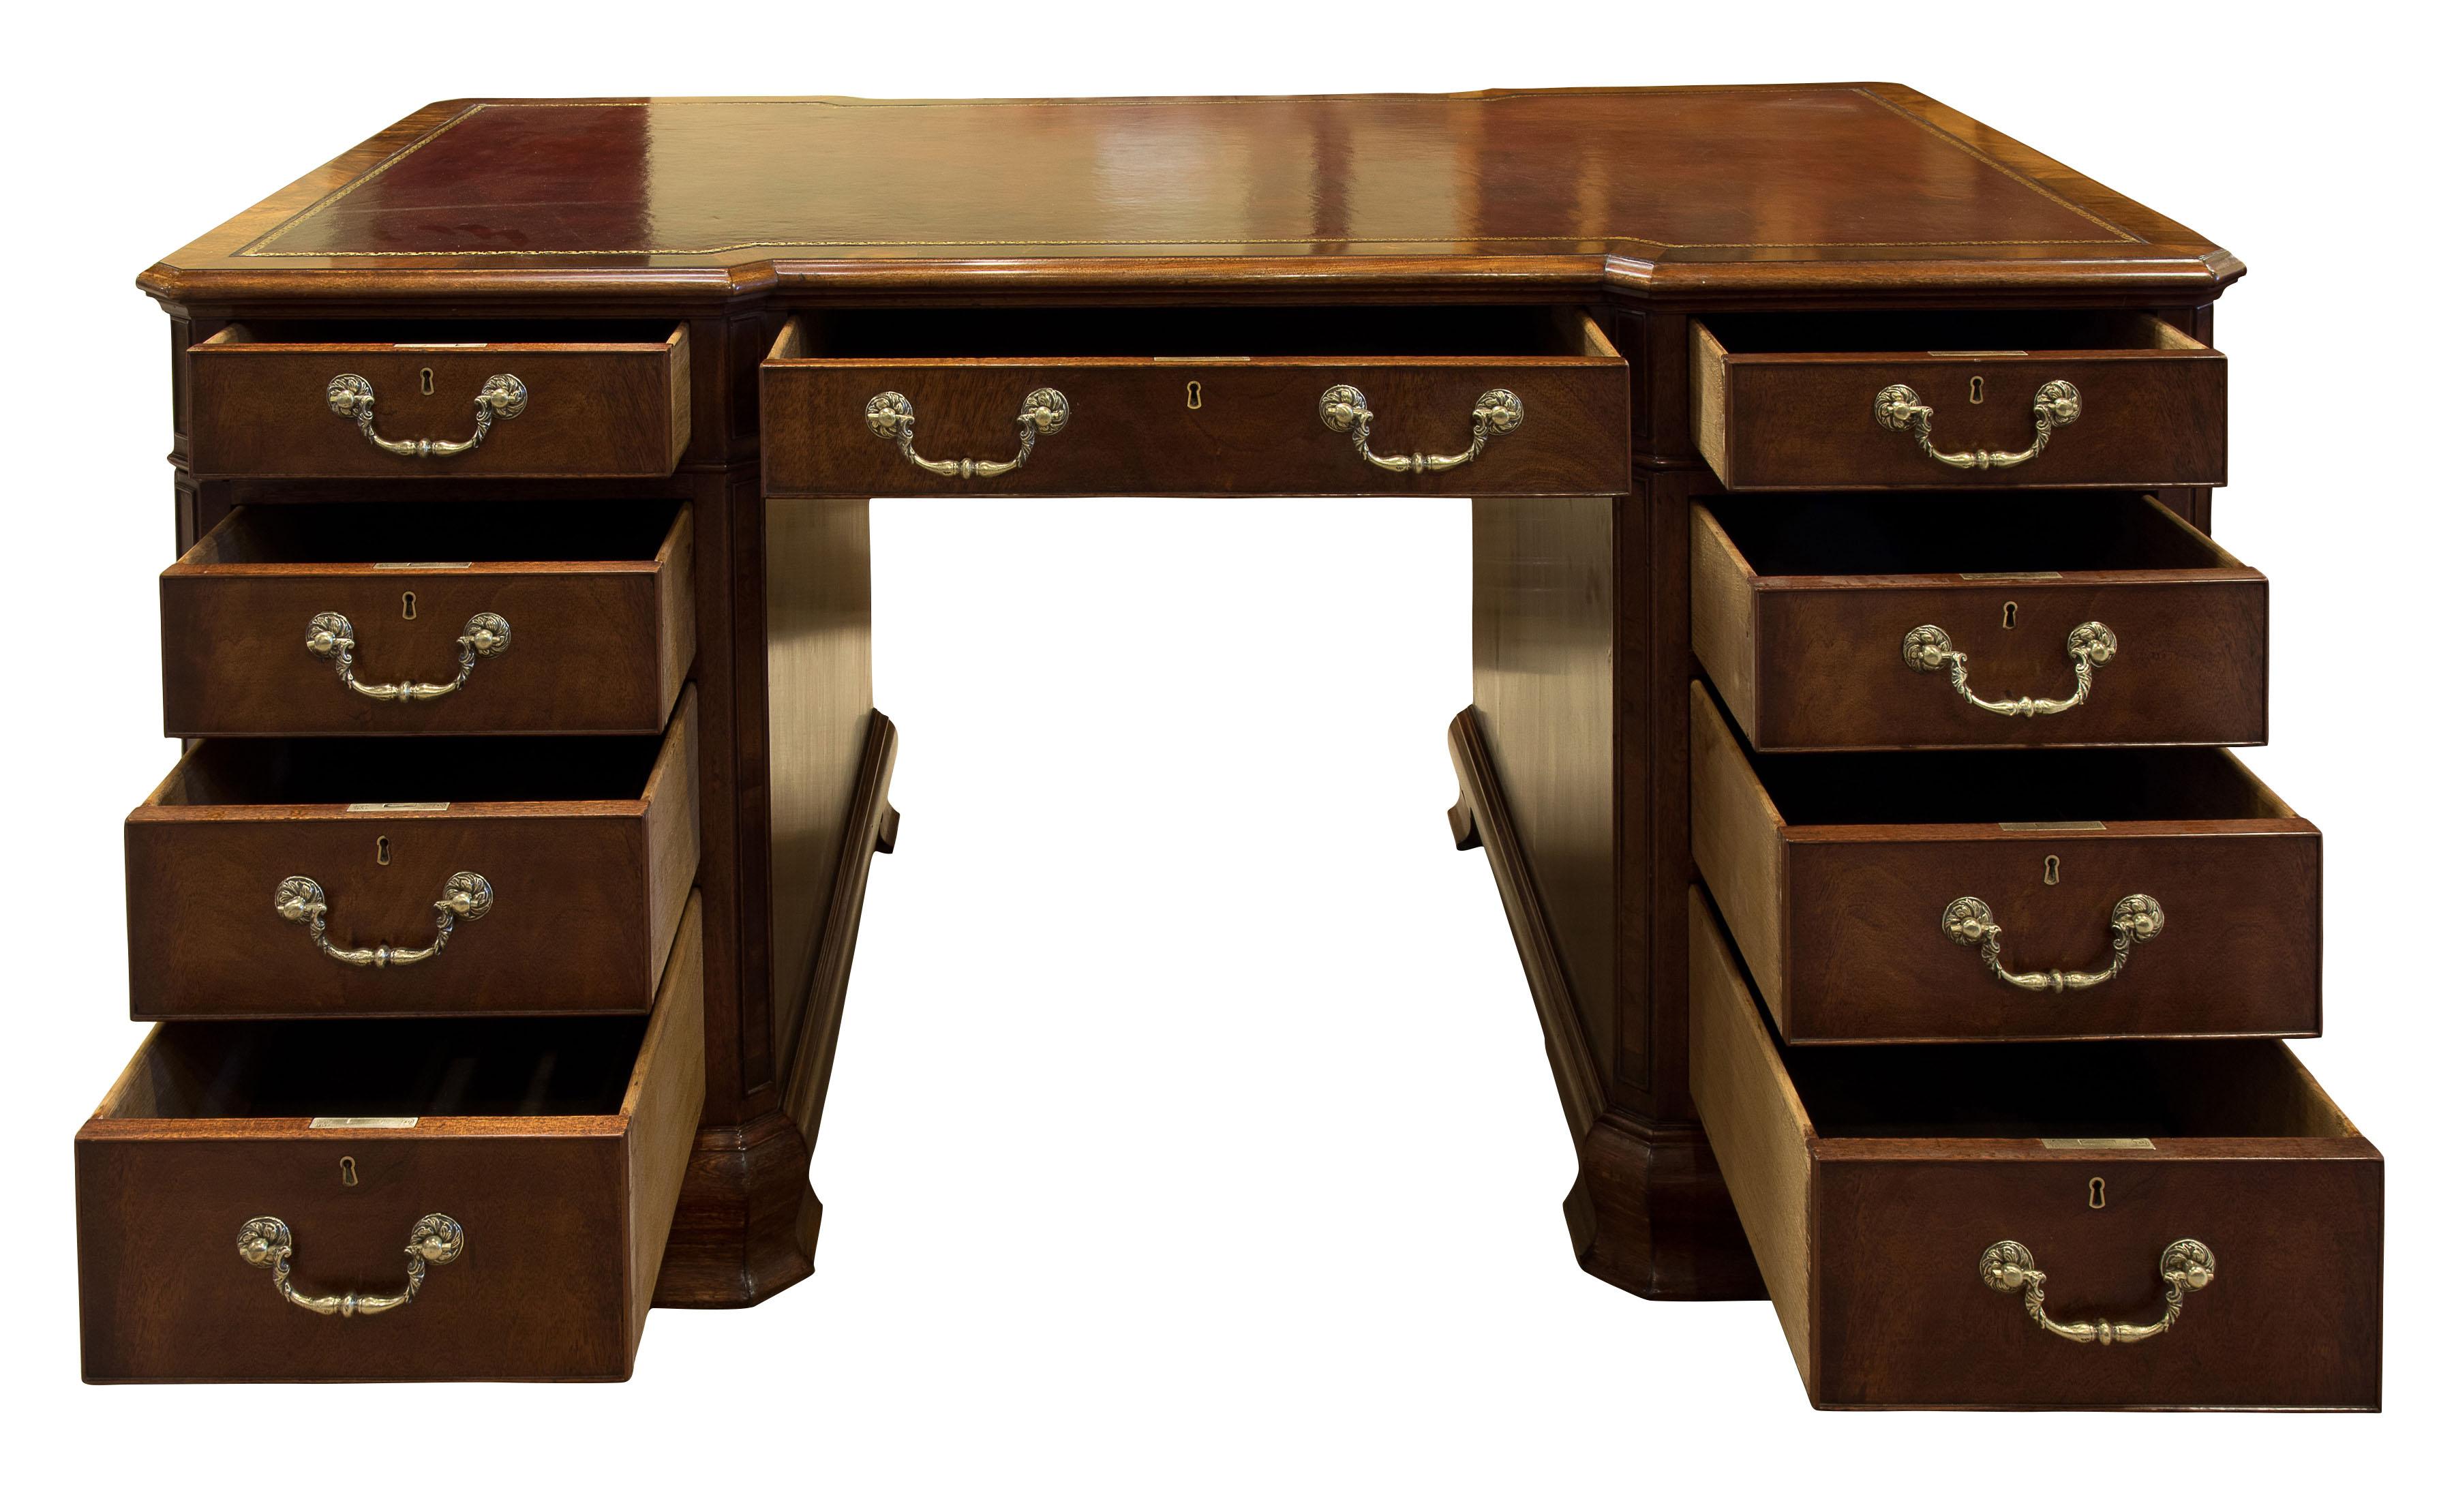 19th century mahogany desk. Inverted breakfront with canted corners shaped bracket feet with skirting reveal. Hand dyed and tooled leather insert,

 

circa 1880.